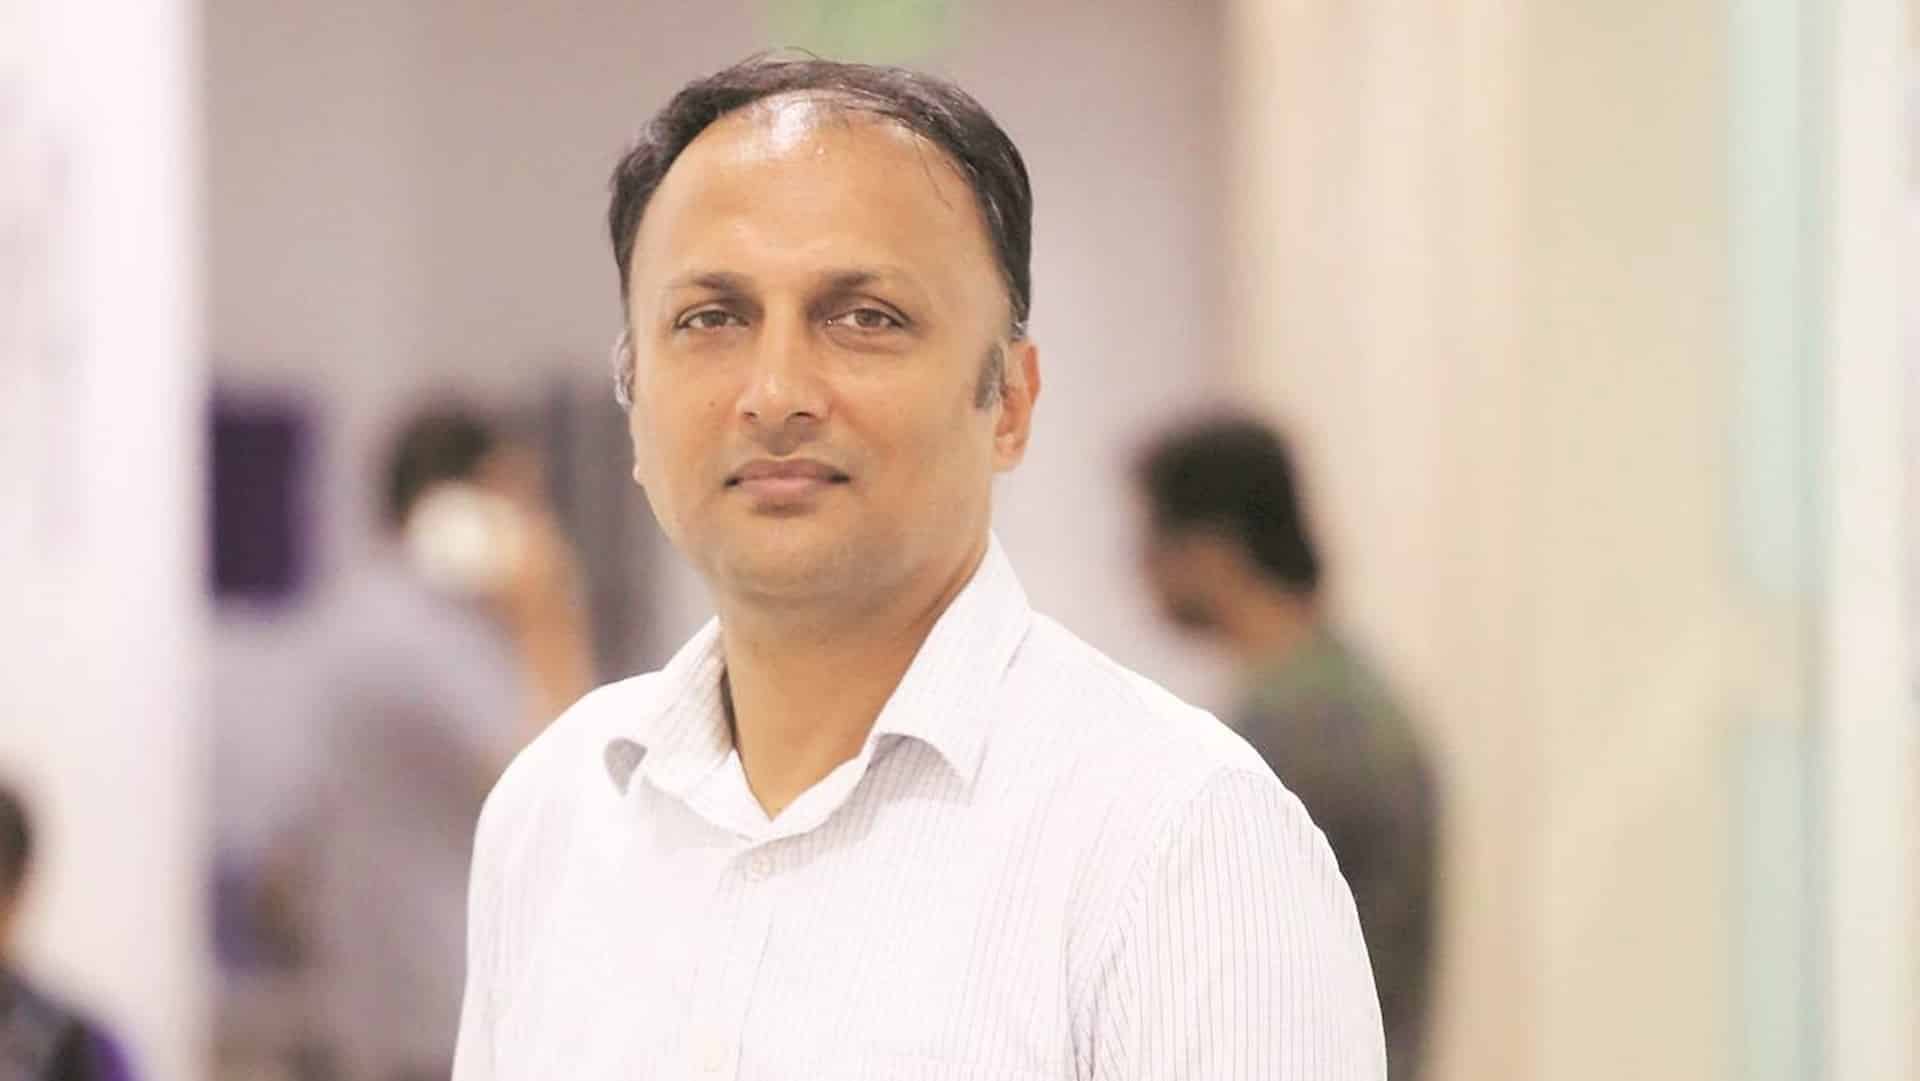 Swiggy COO Vivek Sunder to step down; CEO Majety to oversee role